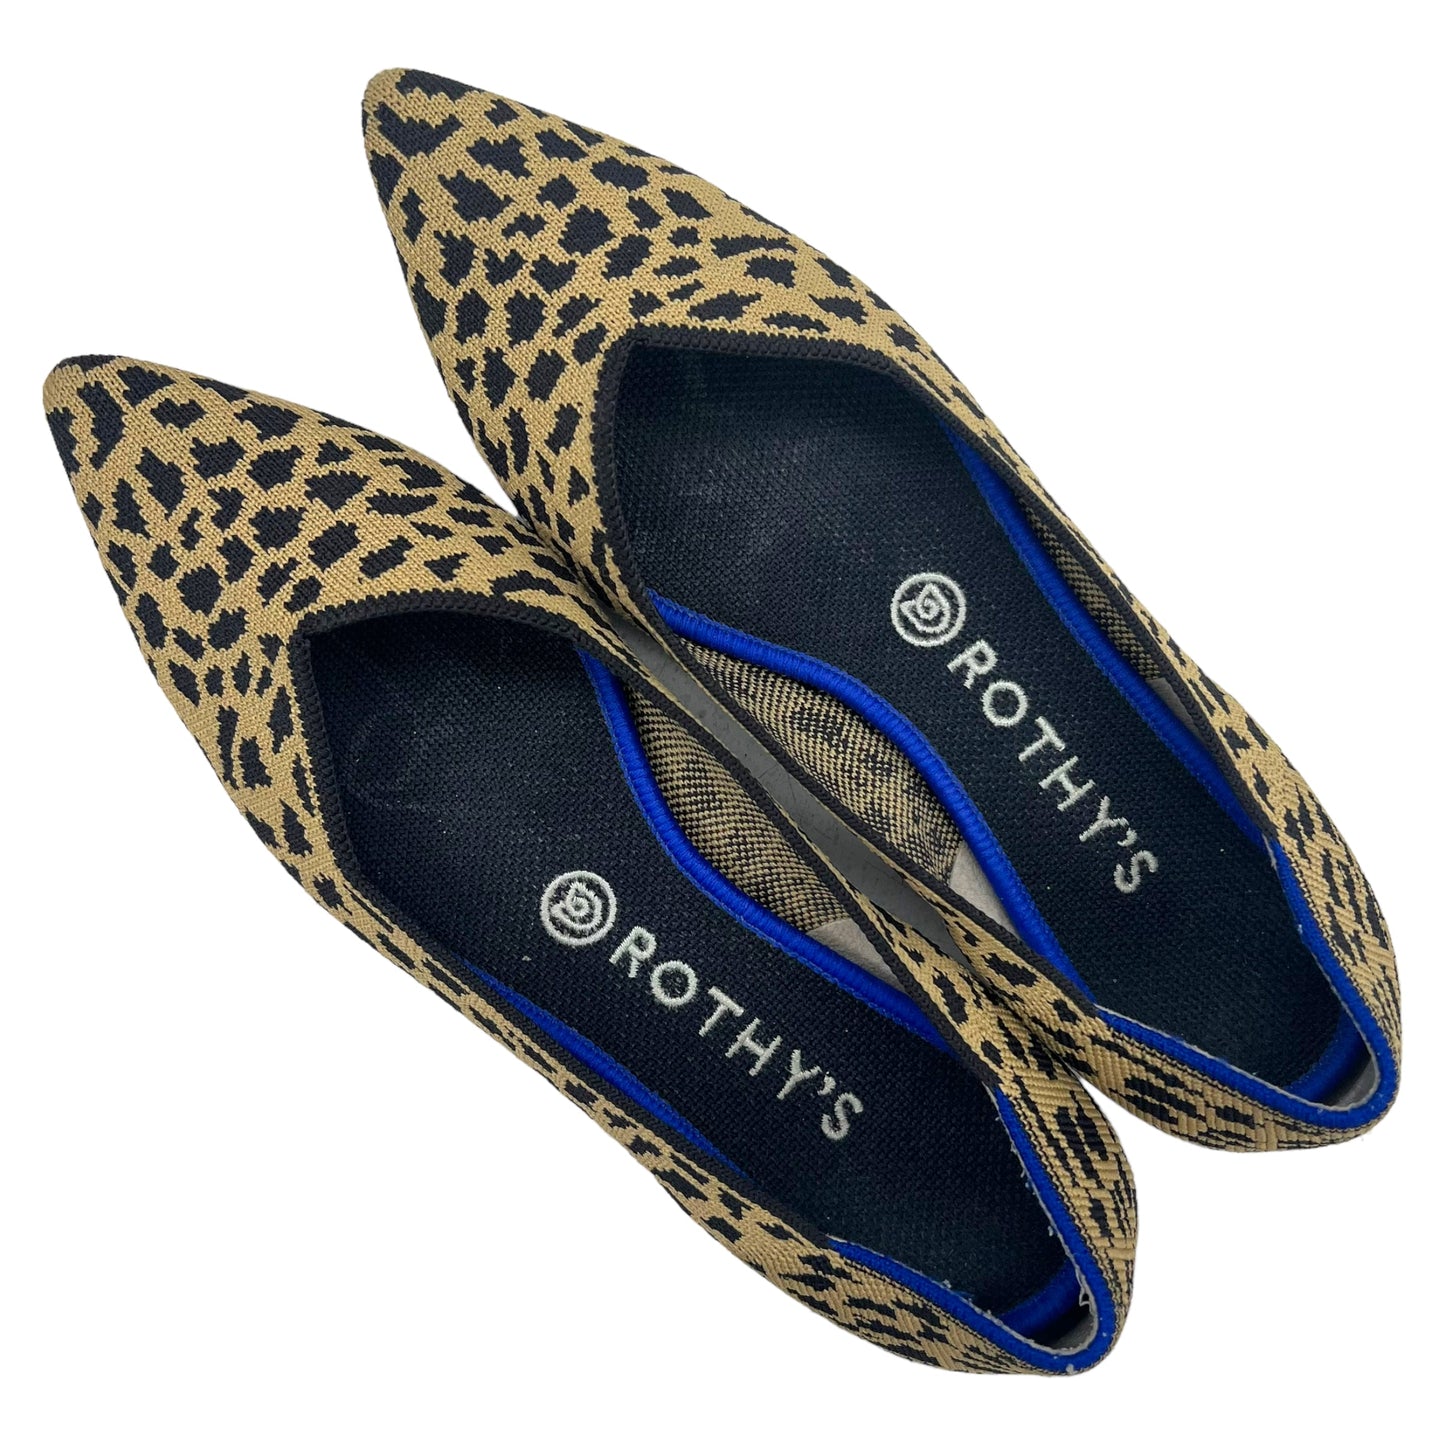 Shoes Flats By Rothys  Size: 9